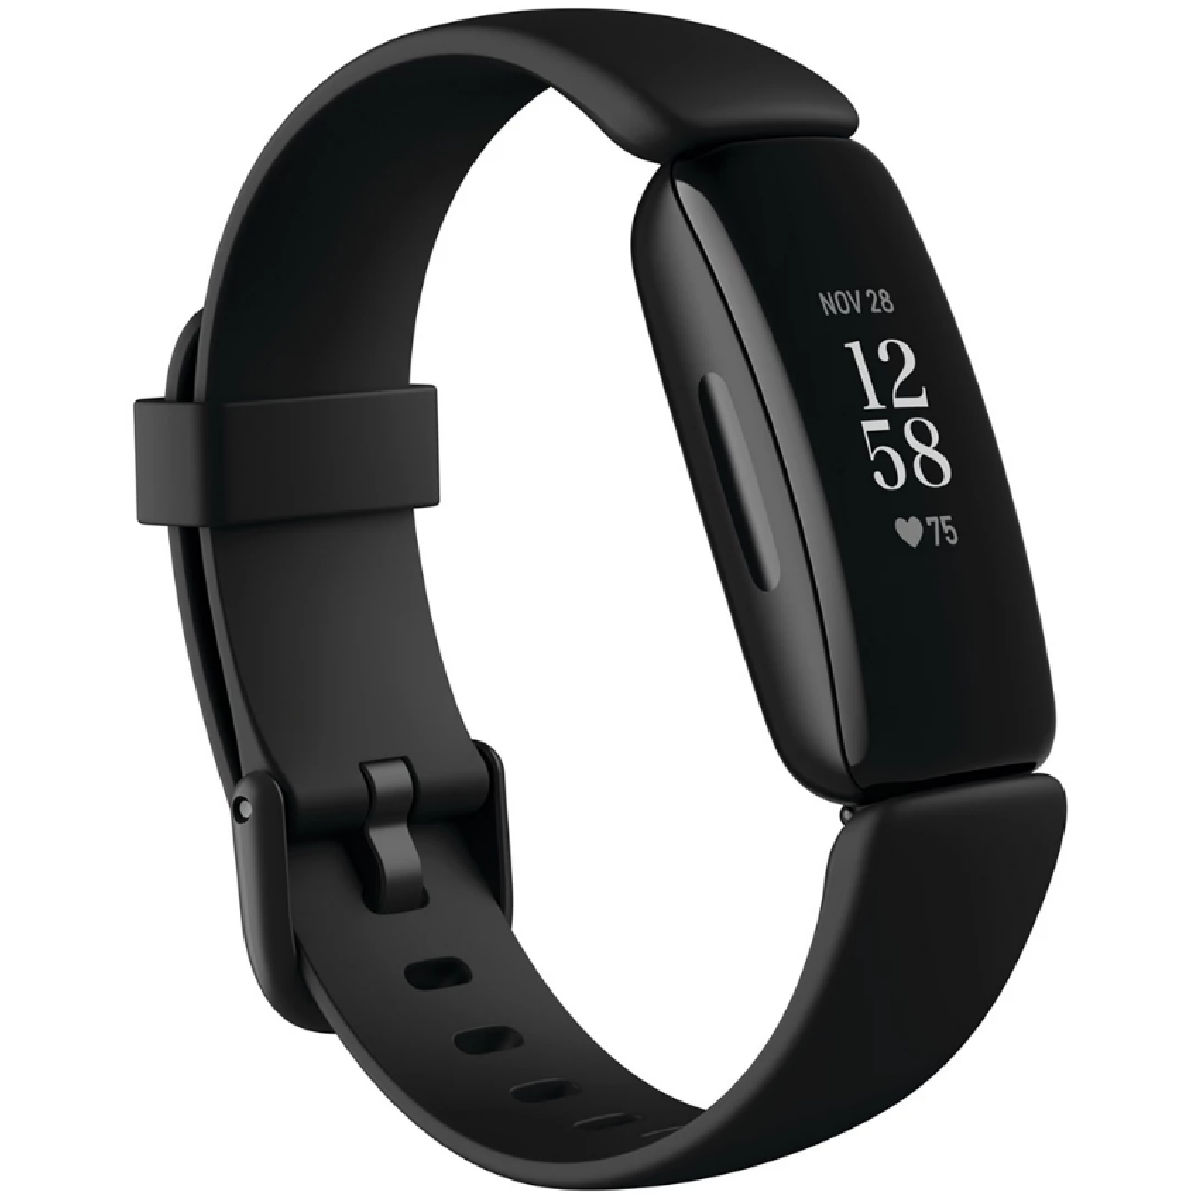 Fitbit Inspire 2 Health and Fitness Tracker